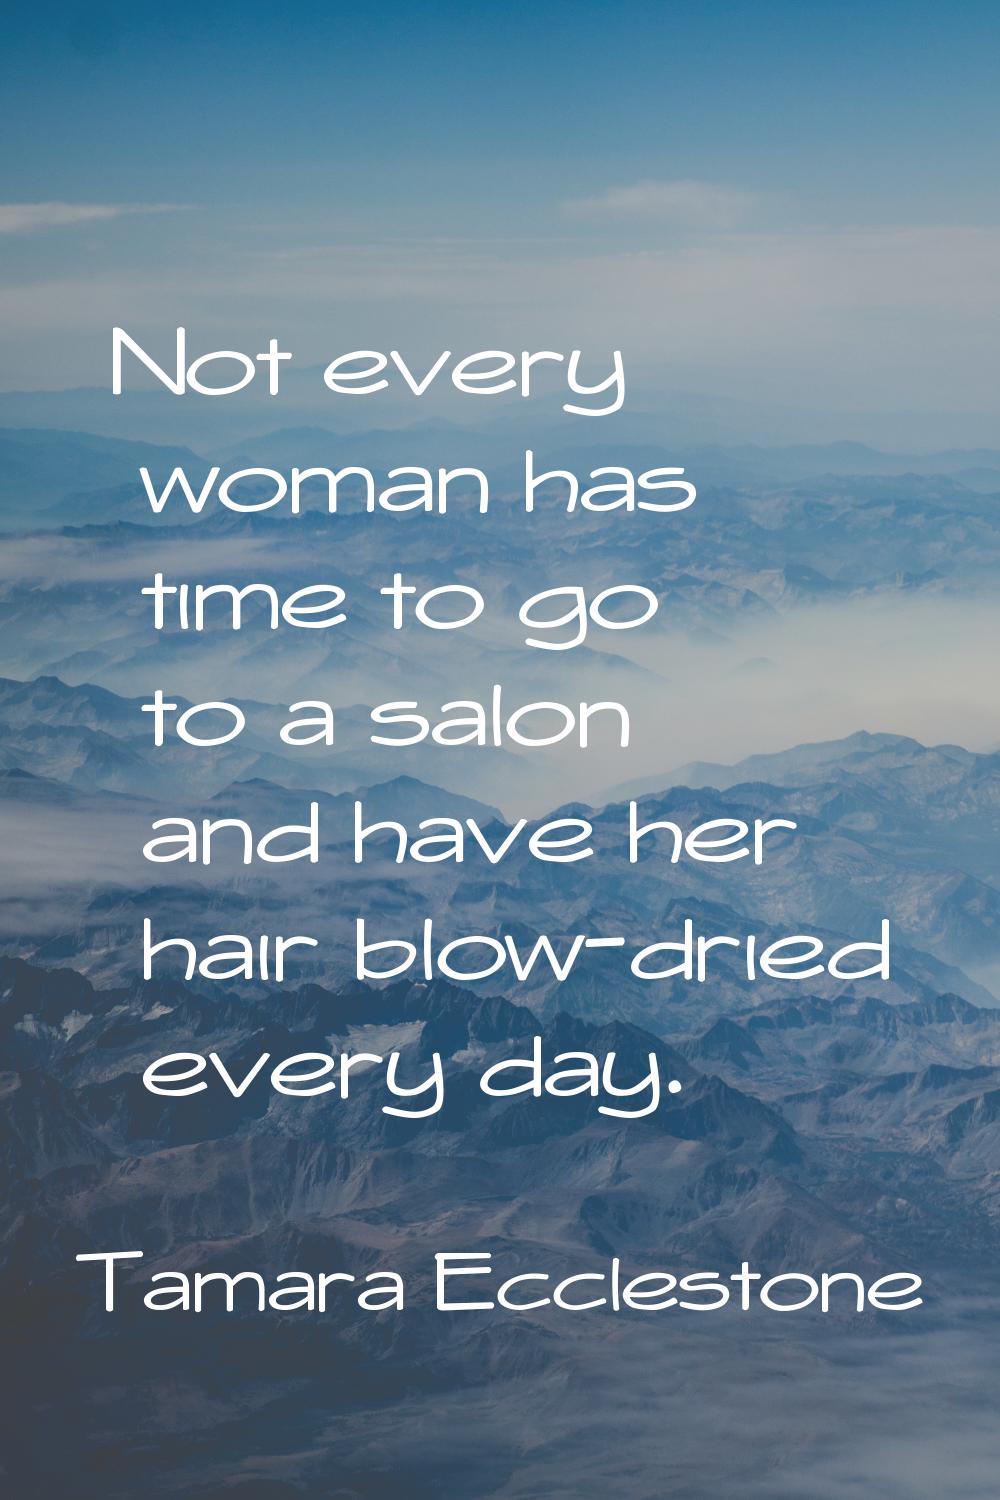 Not every woman has time to go to a salon and have her hair blow-dried every day.